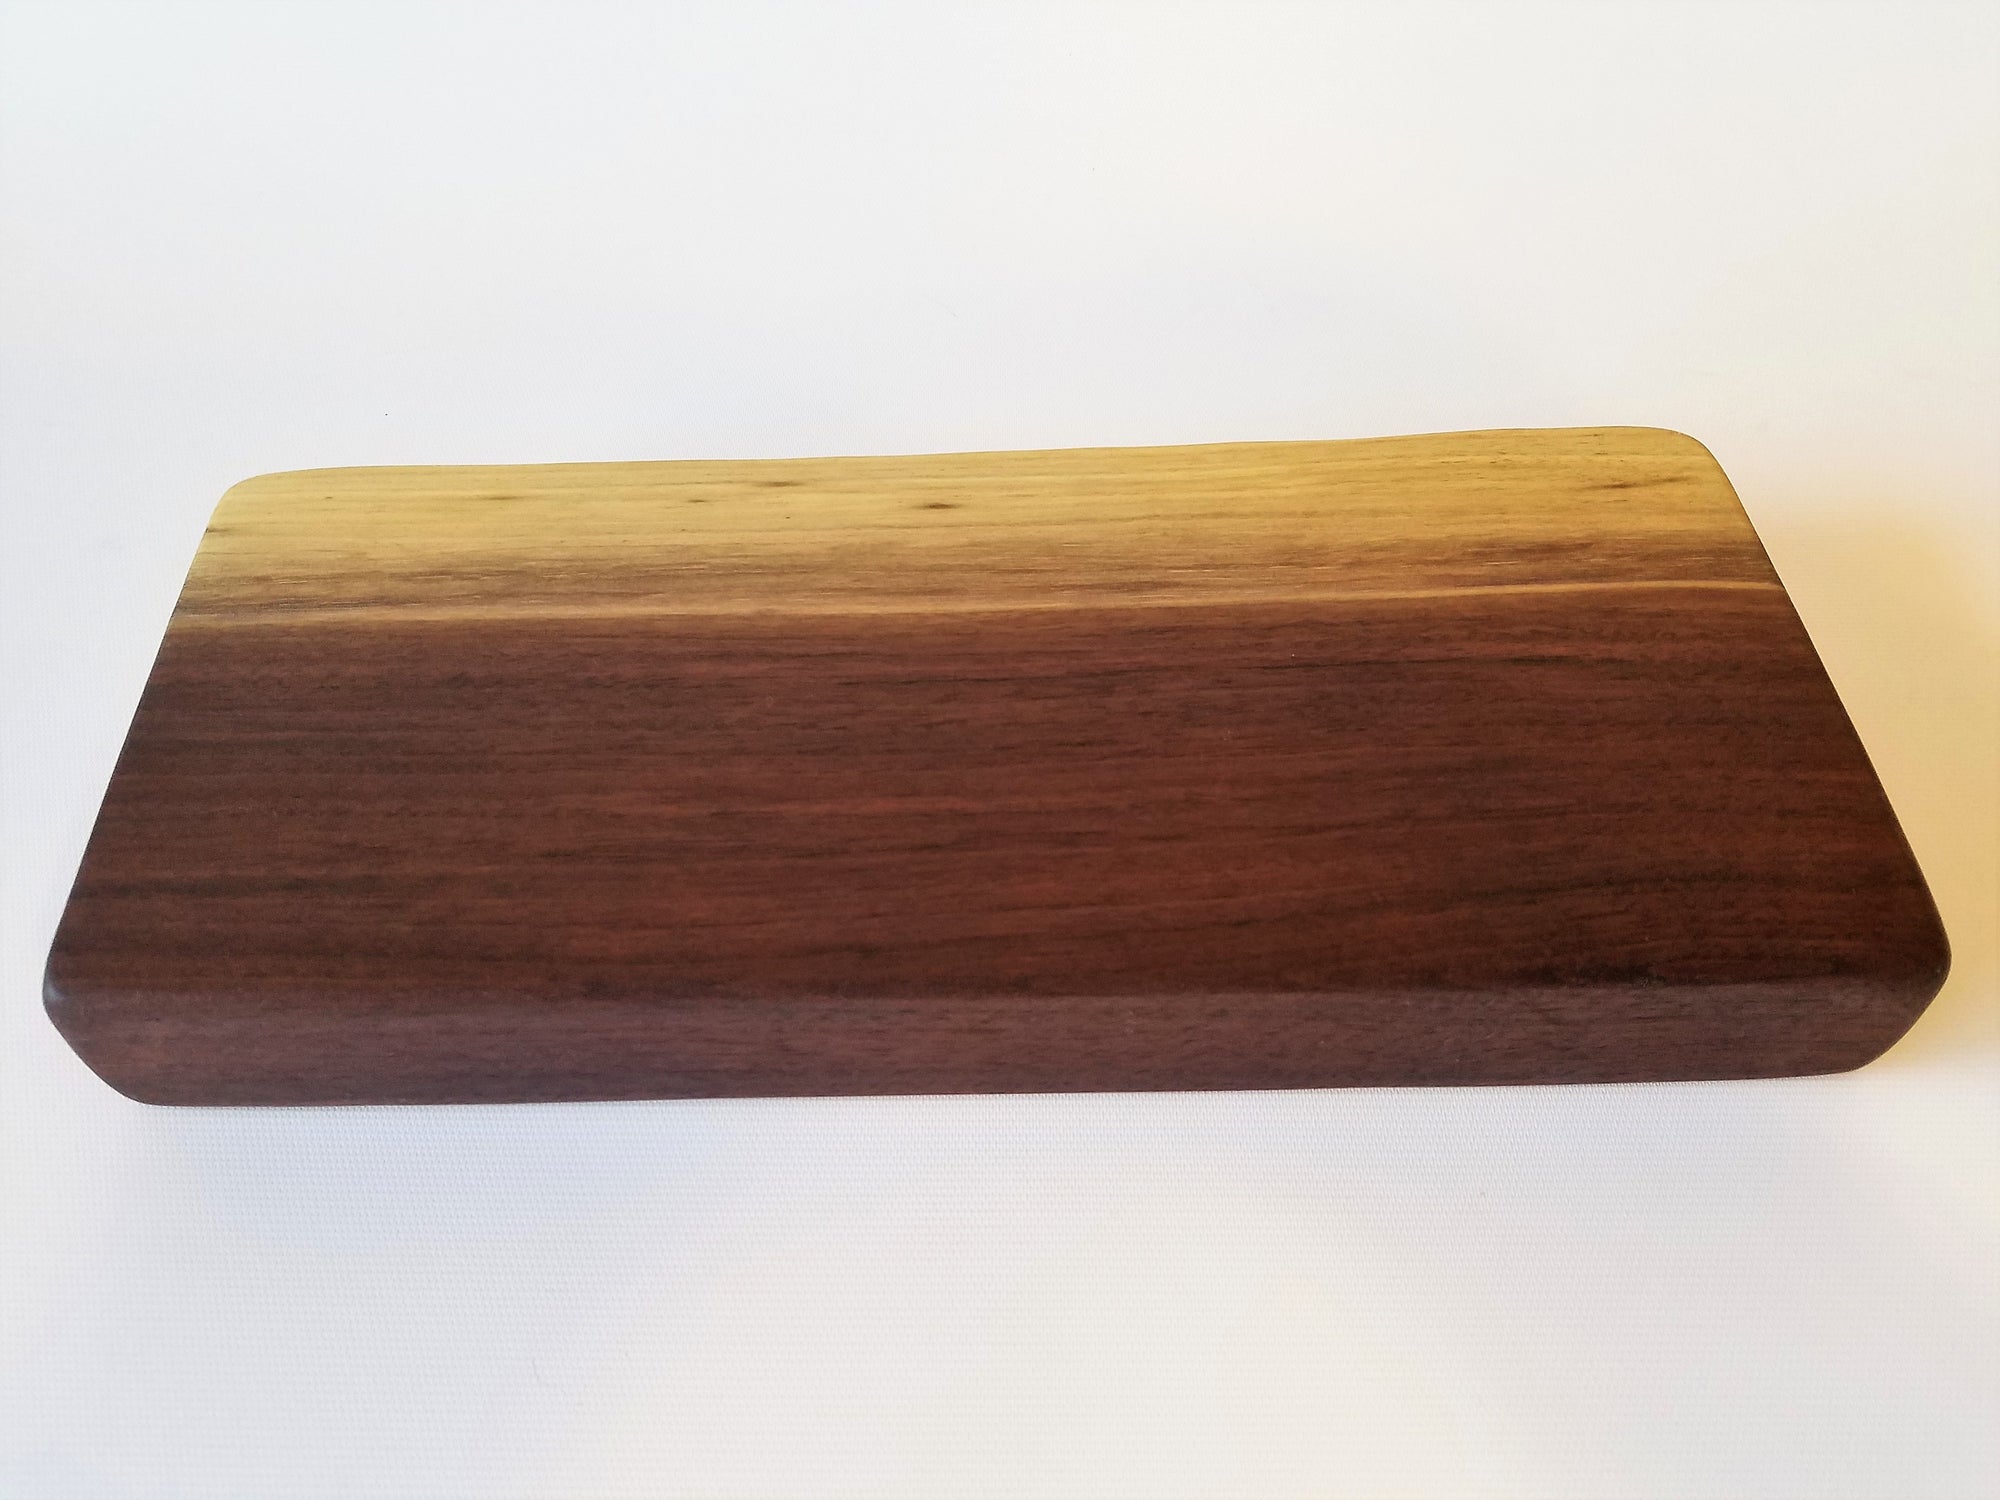 Charcuterie Board- Natural Wood- Serving Board- Food Server- Walnut- Party- Host- Hostess- Table Decor- Gift- Foodie- Chef- Cooking- Platter